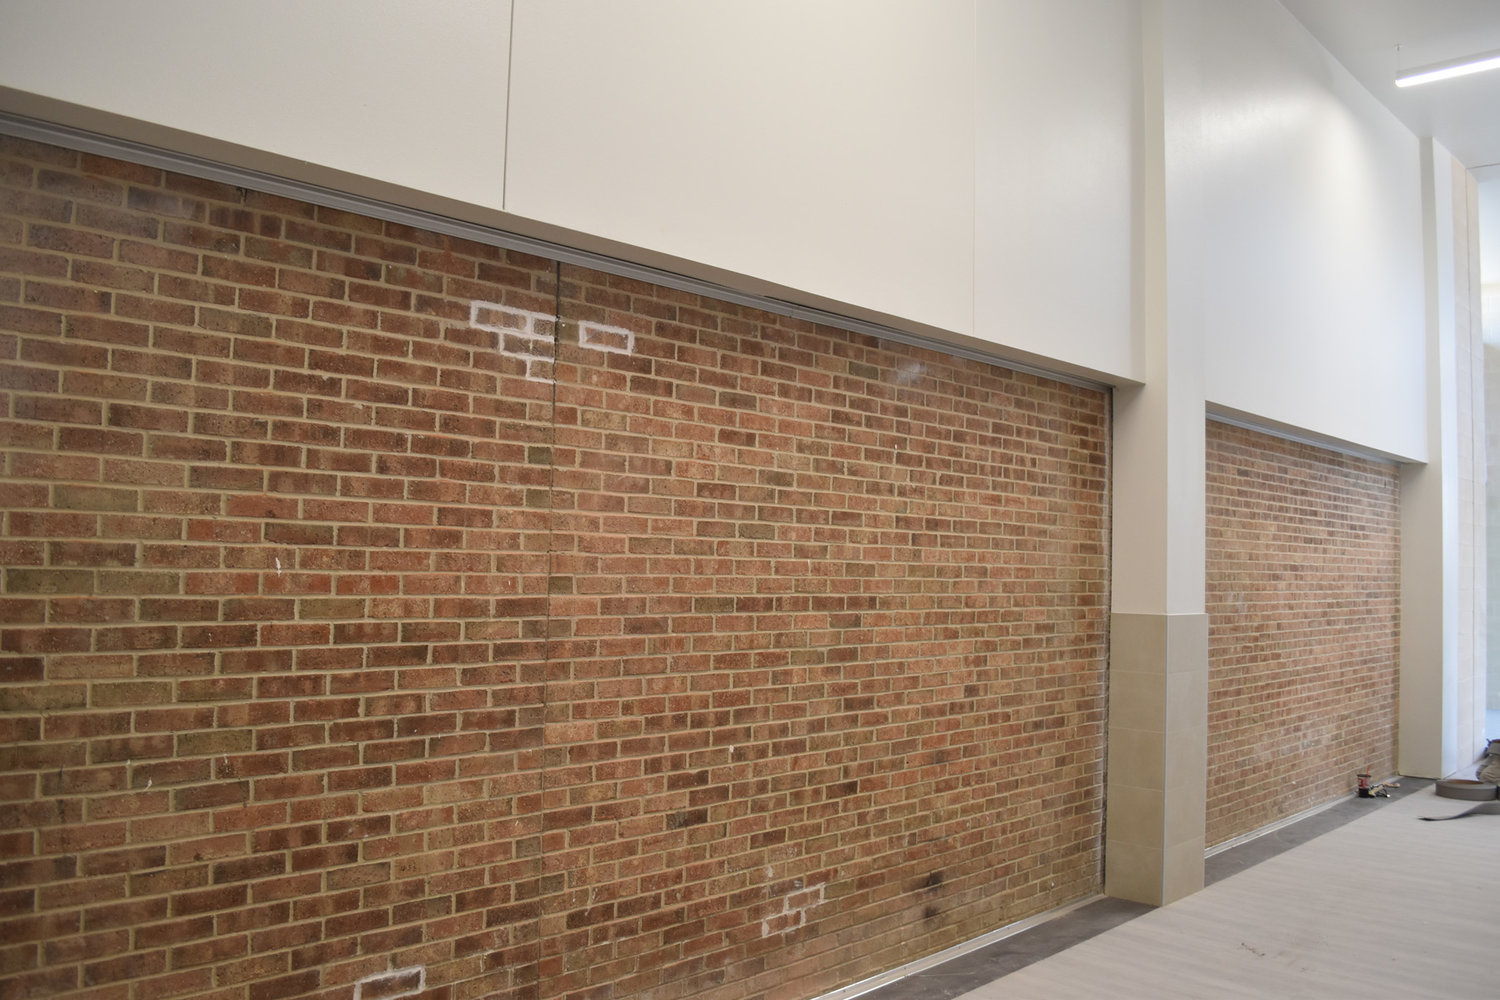 The exterior of the existing building made a durable interior wall in the new addition.